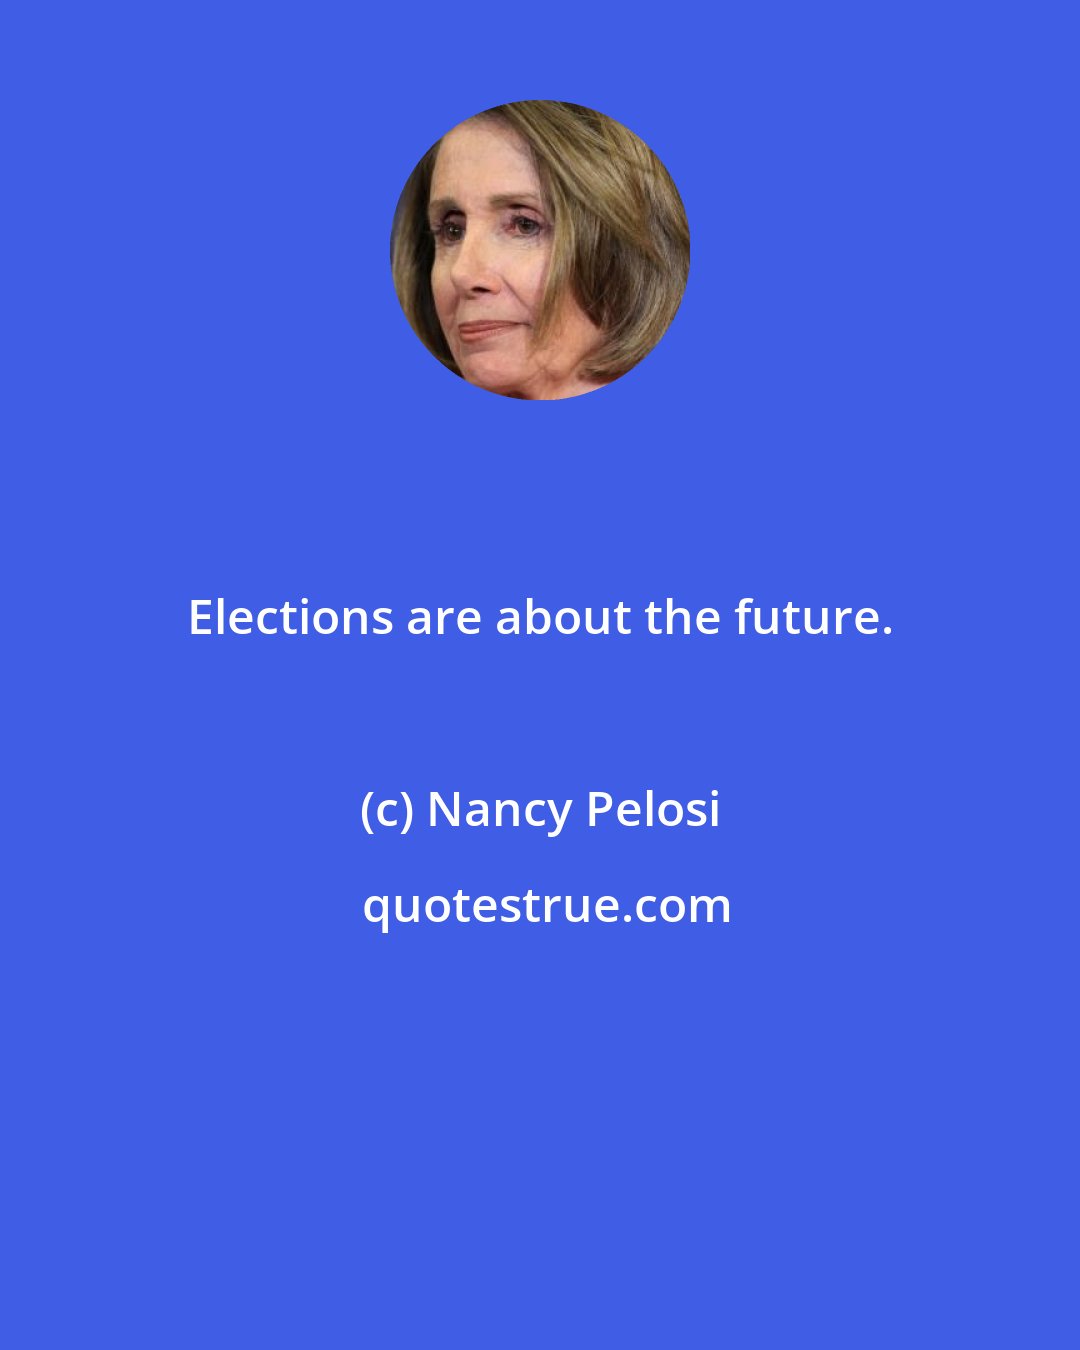 Nancy Pelosi: Elections are about the future.